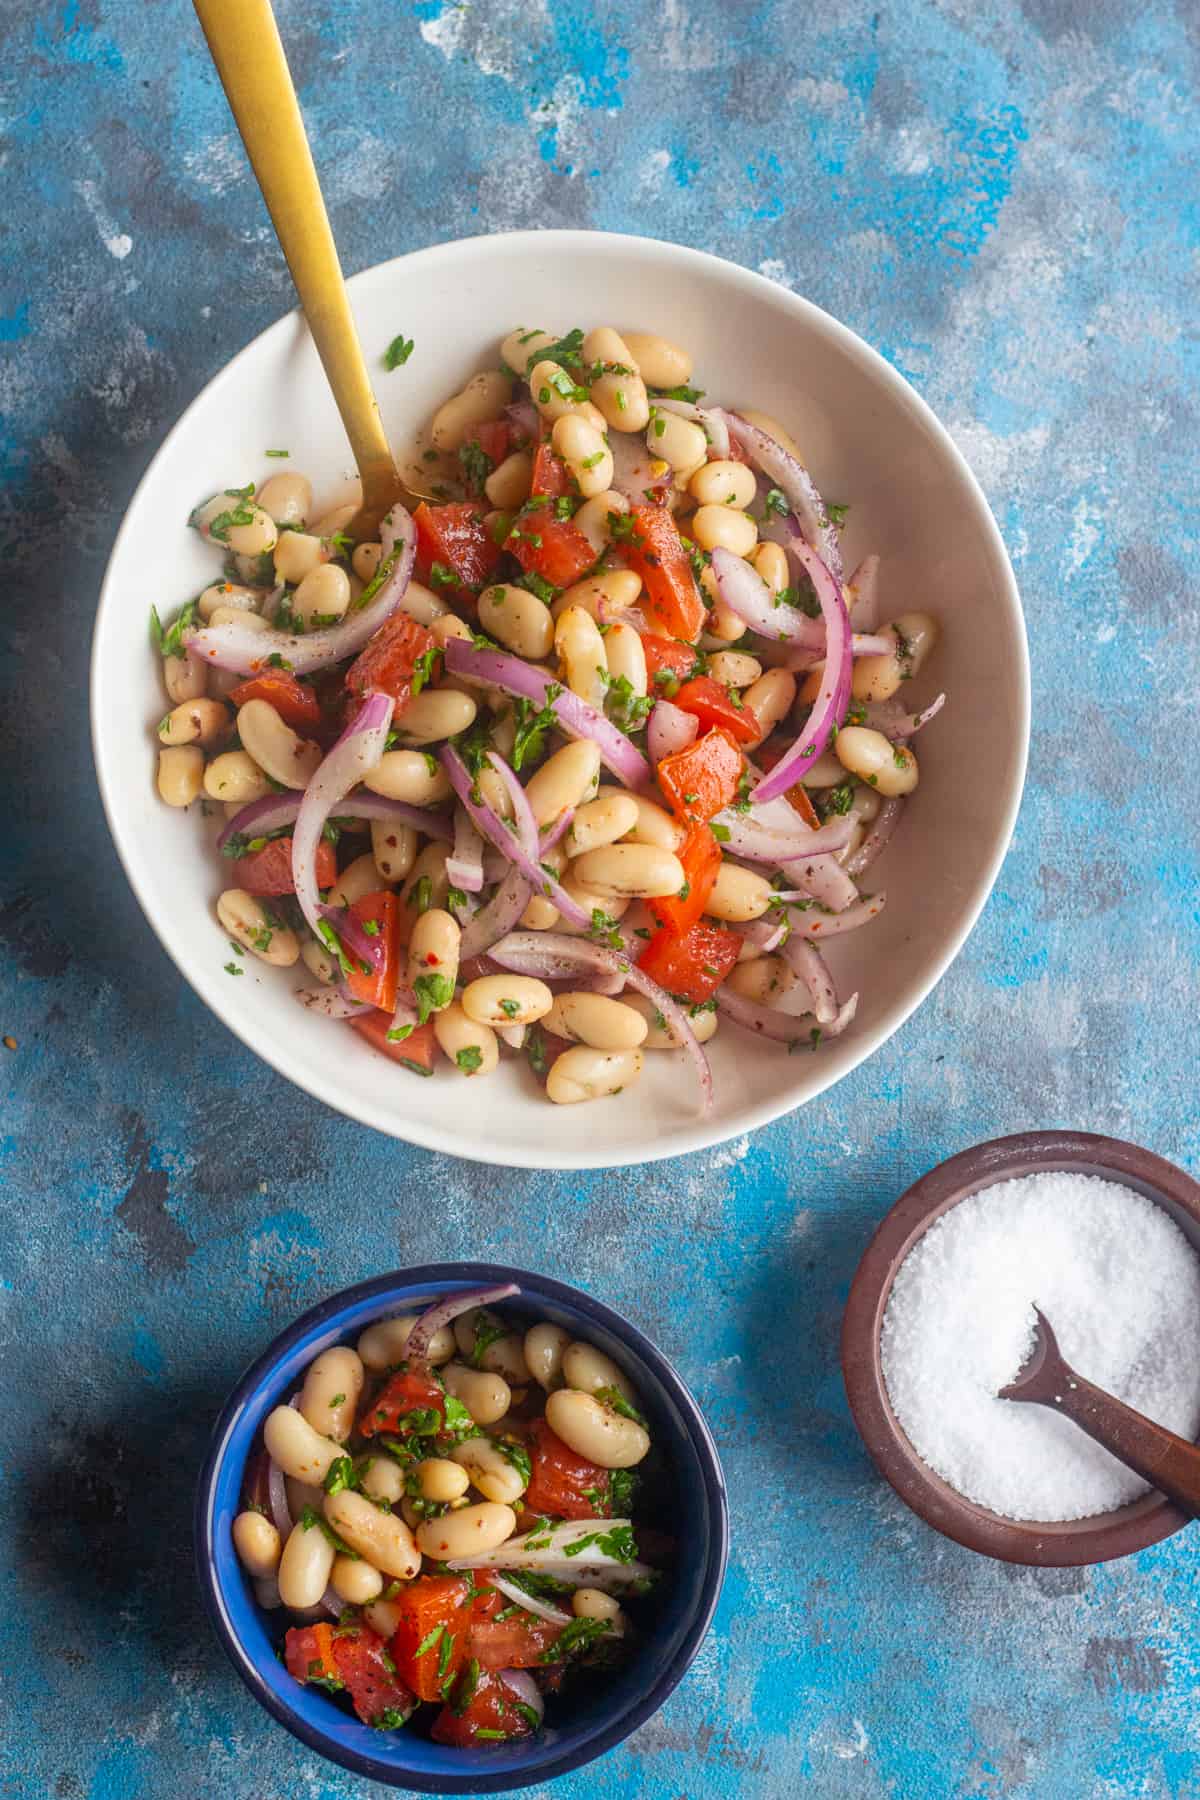 Turkish white bean salad (Piyaz) is made with a few ingredients and is ready in ten minutes. If you're looking for a delicious and simple salad, you should try this one! Packed with amazing flavors, this white bean salad is a great side dish. This salad is vegan and gluten free. The dressing is made with olive oil and sumac, so refreshing and delicious!   